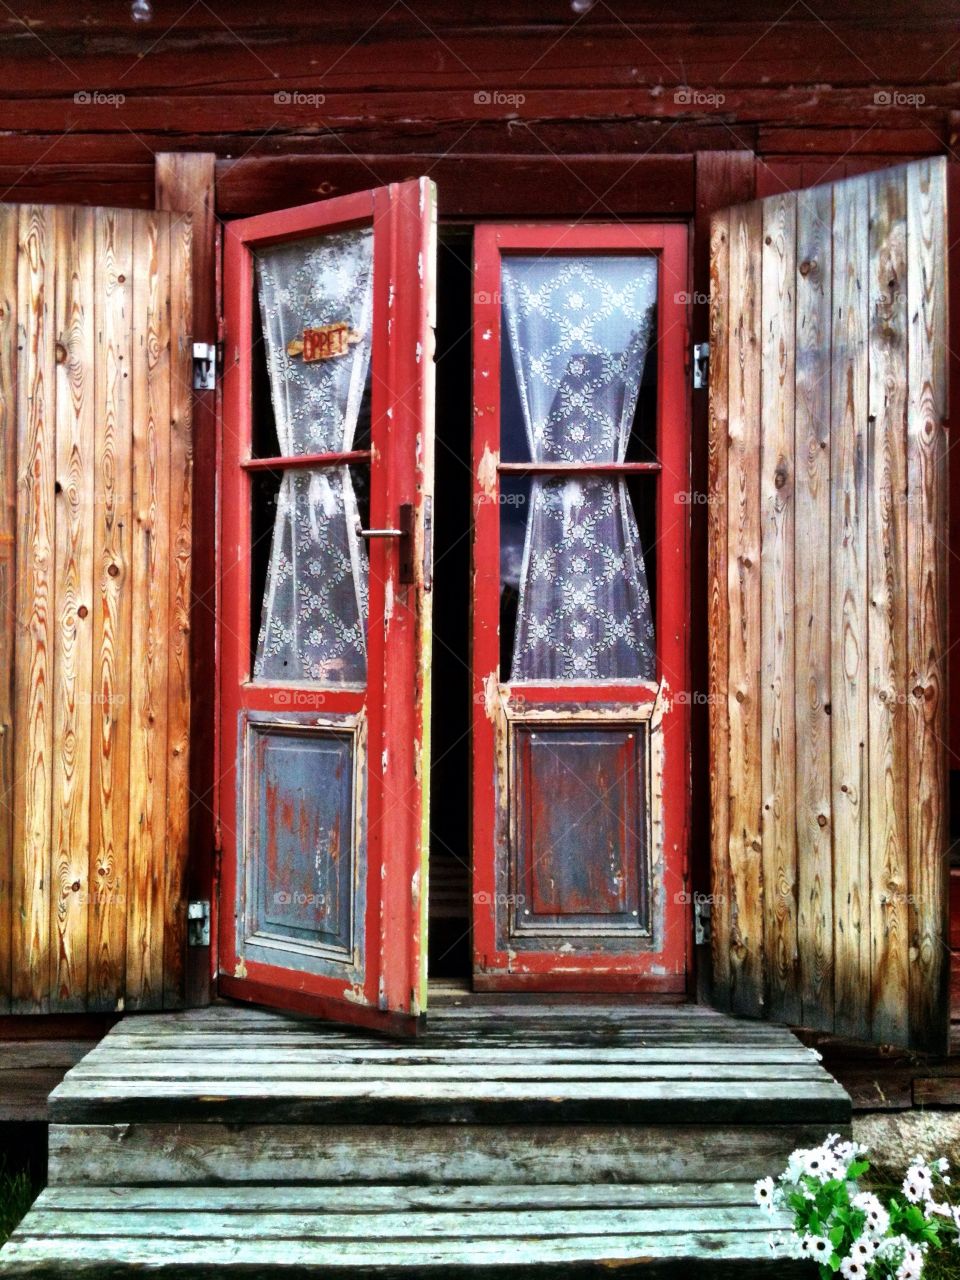 sweden red wood window by lenacarlsson